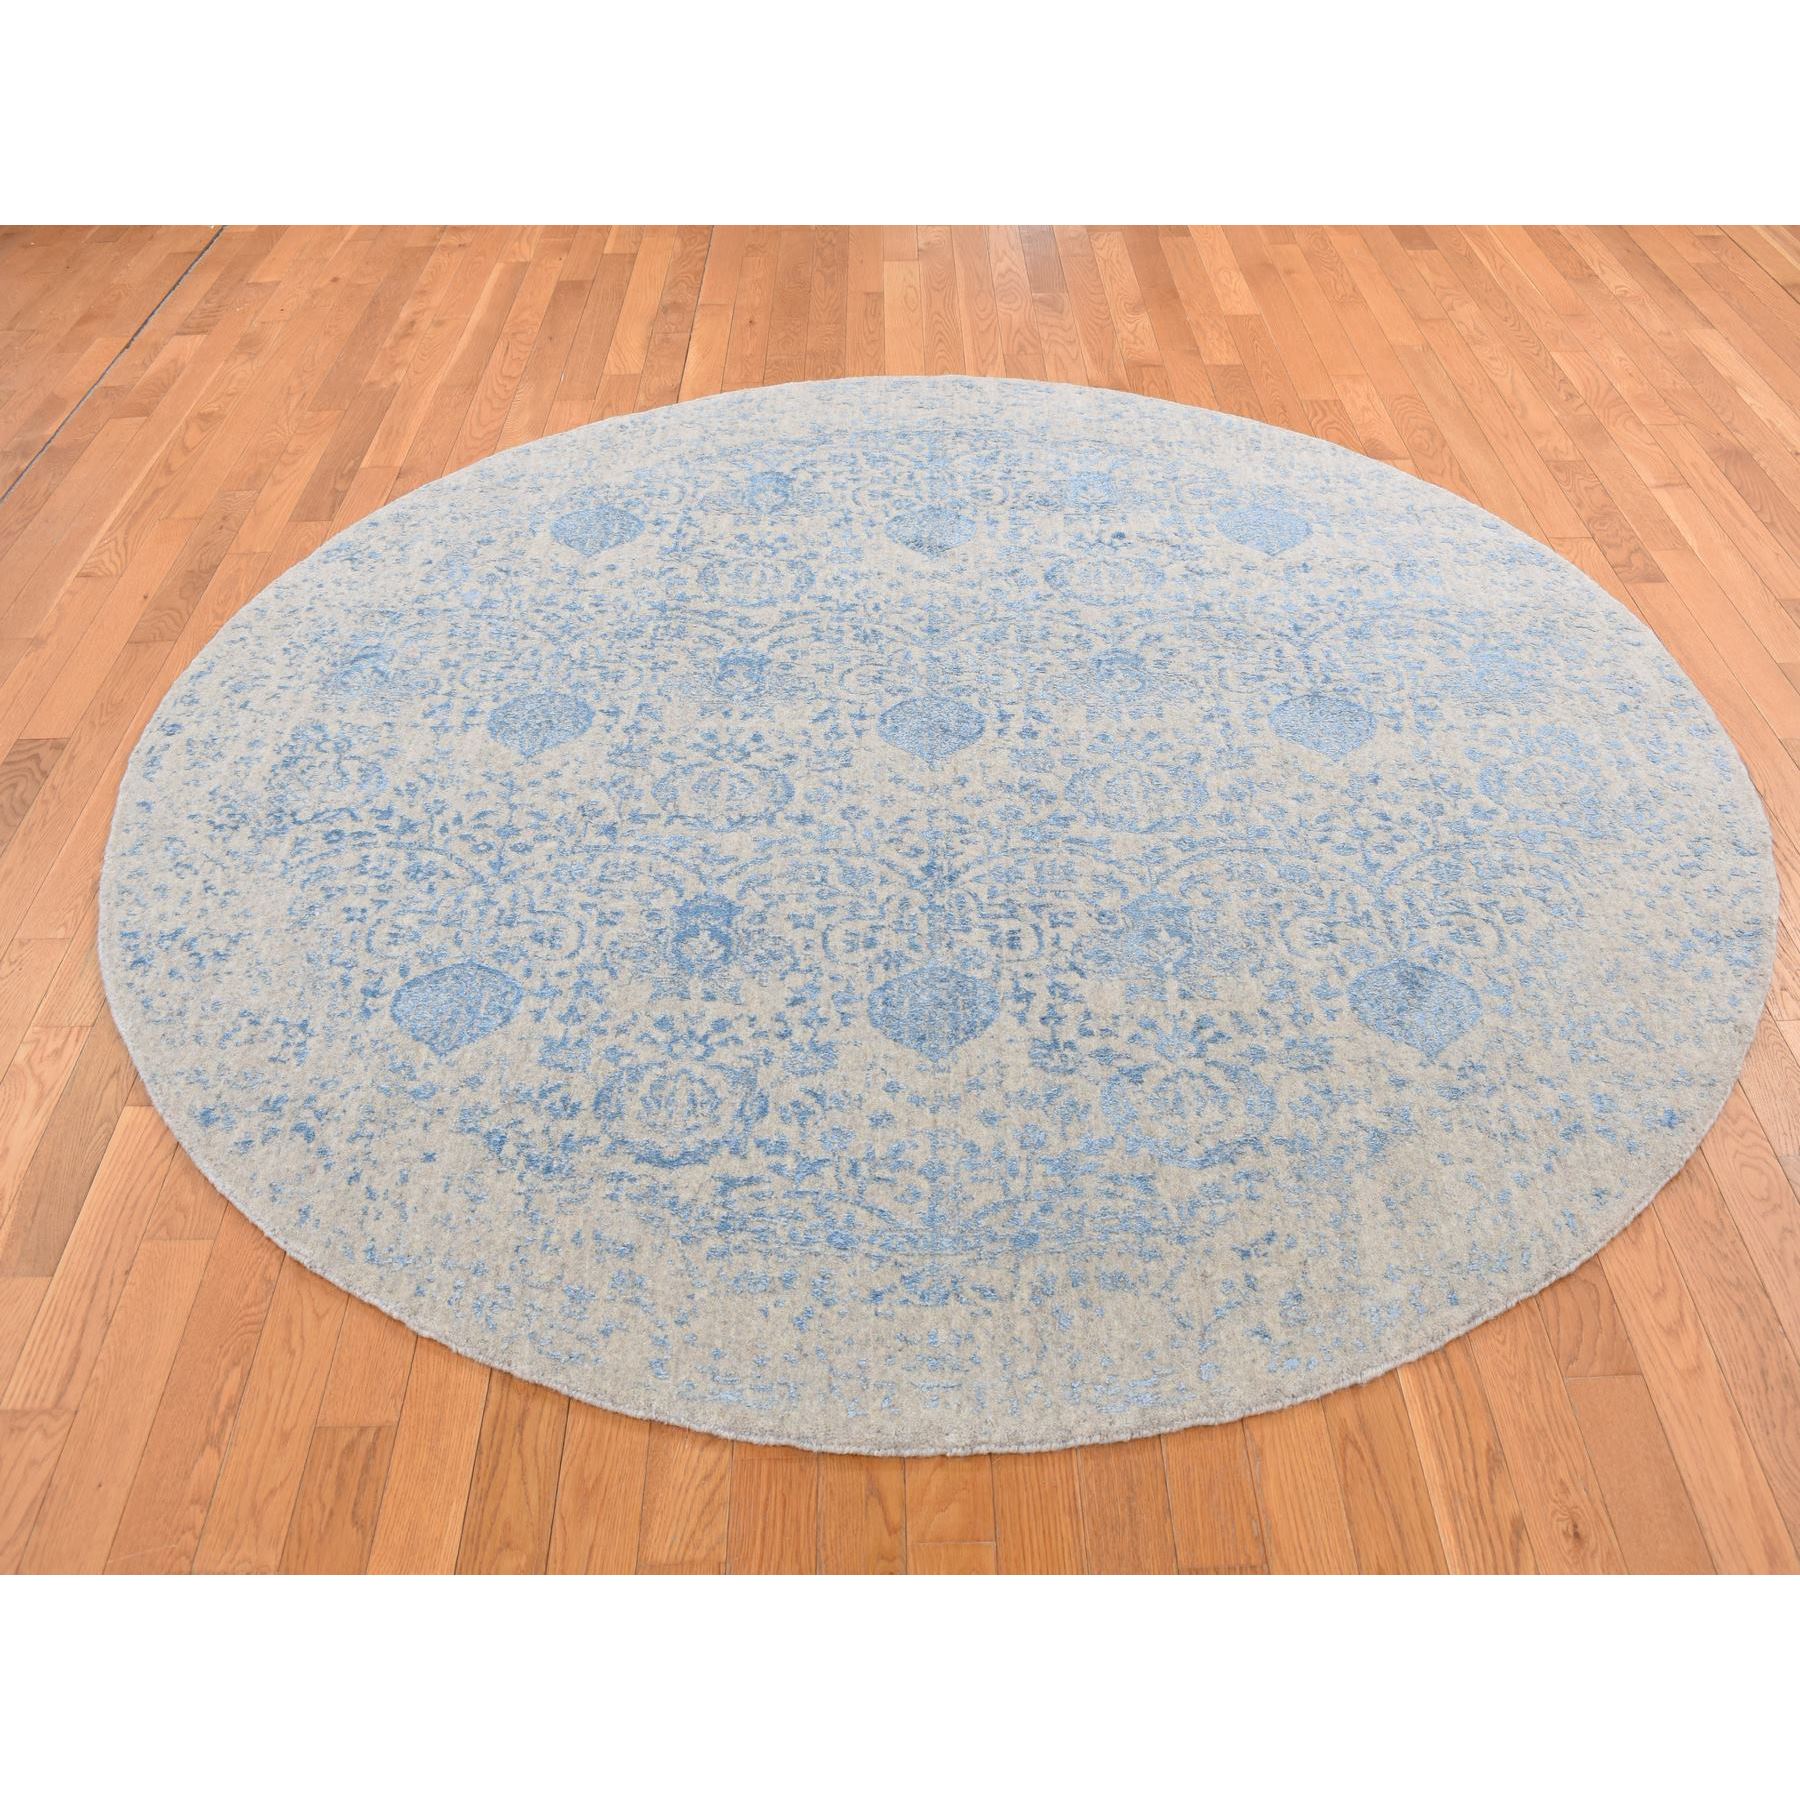 7'9"x7'9" Taupe Color, Broken and Erased Pomegranate Design, Tone on Tone, Jacquard Hand Loomed, Wool and Art Silk, Round Oriental Rug 